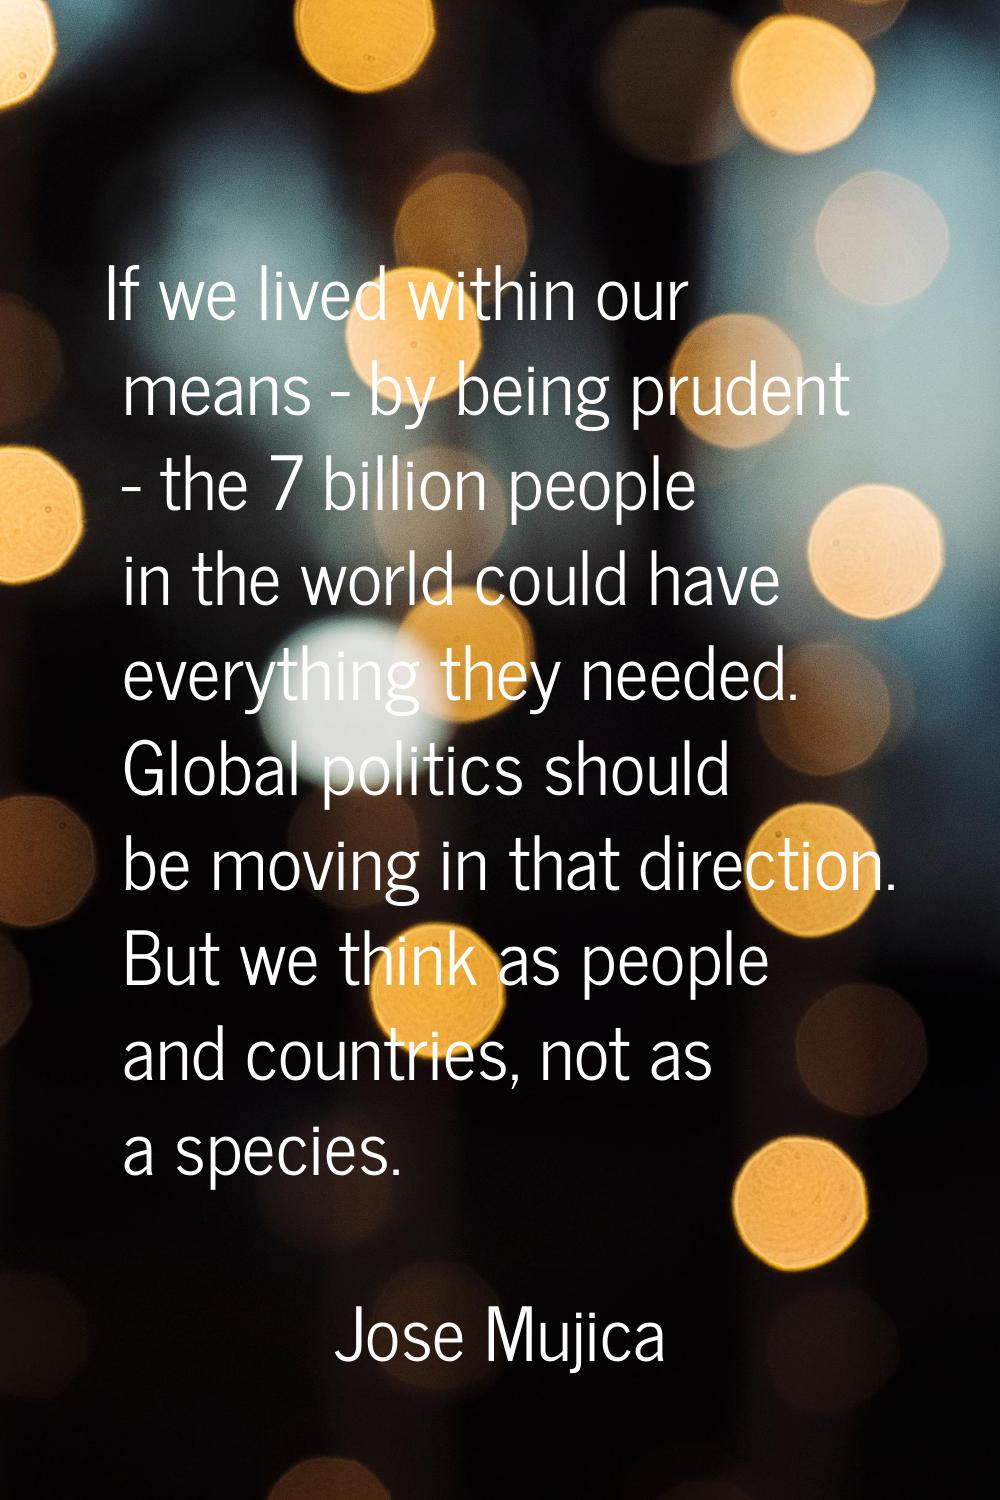 If we lived within our means - by being prudent - the 7 billion people in the world could have ever